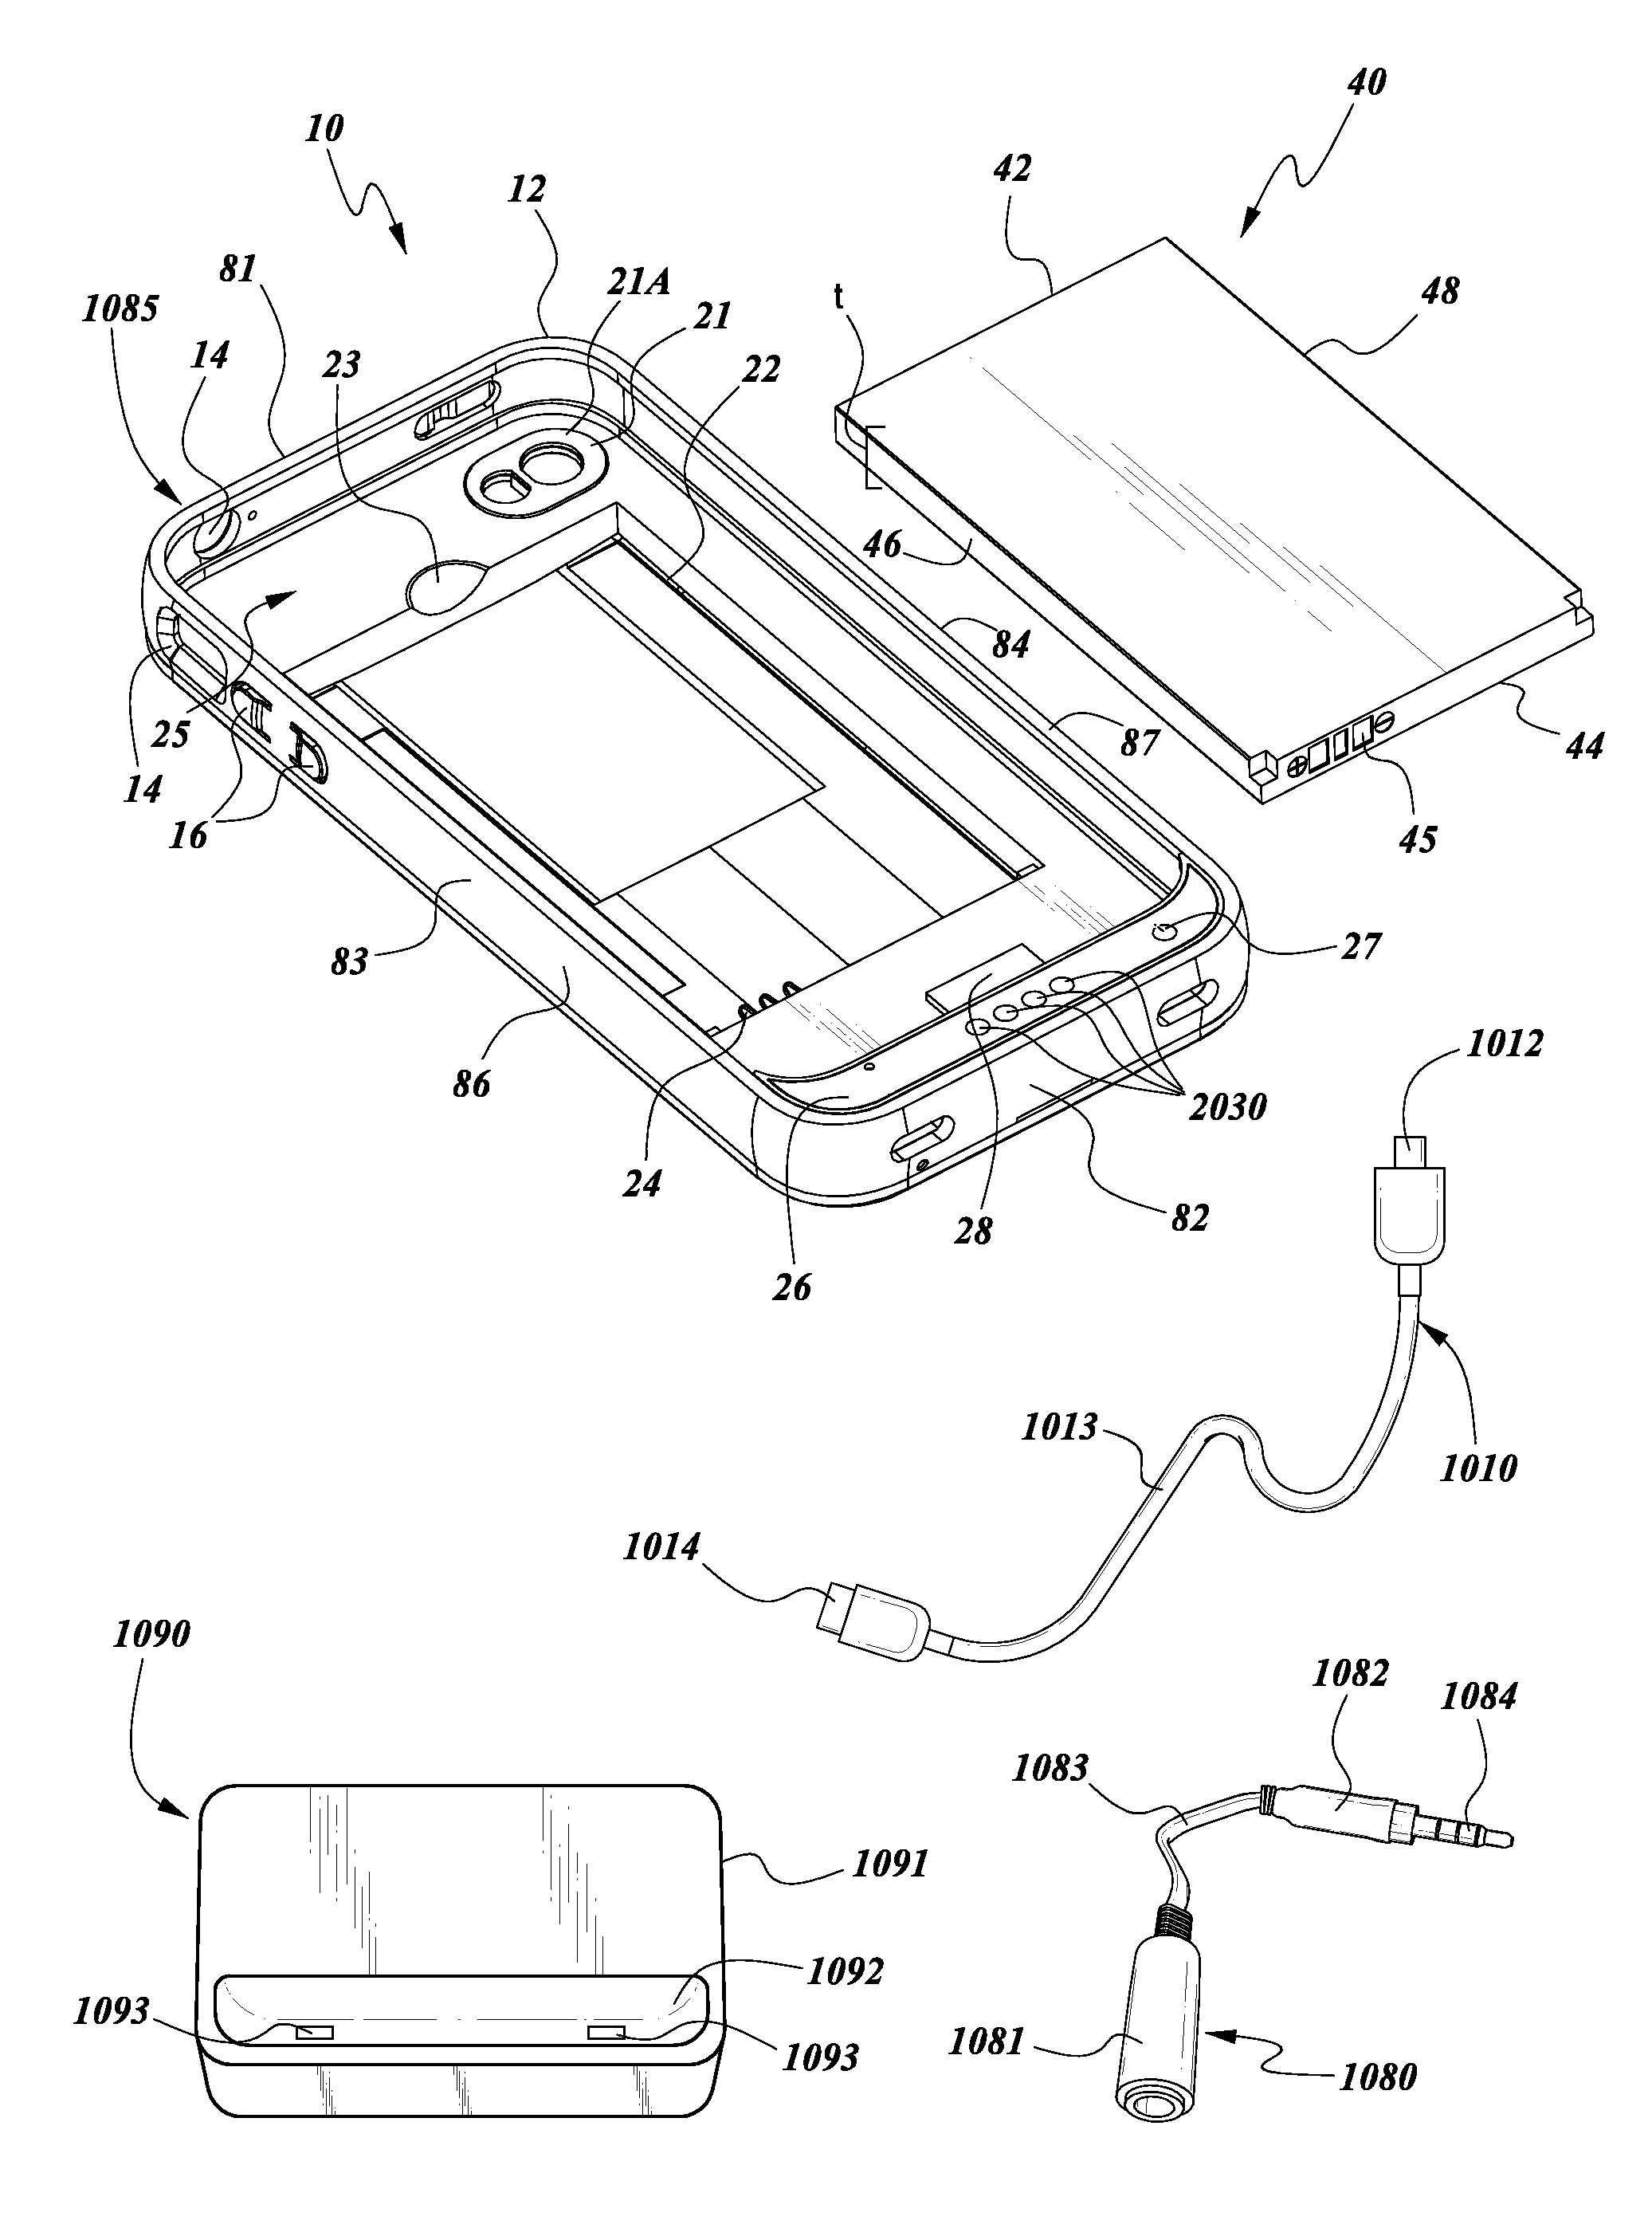 Battery case for mobile device